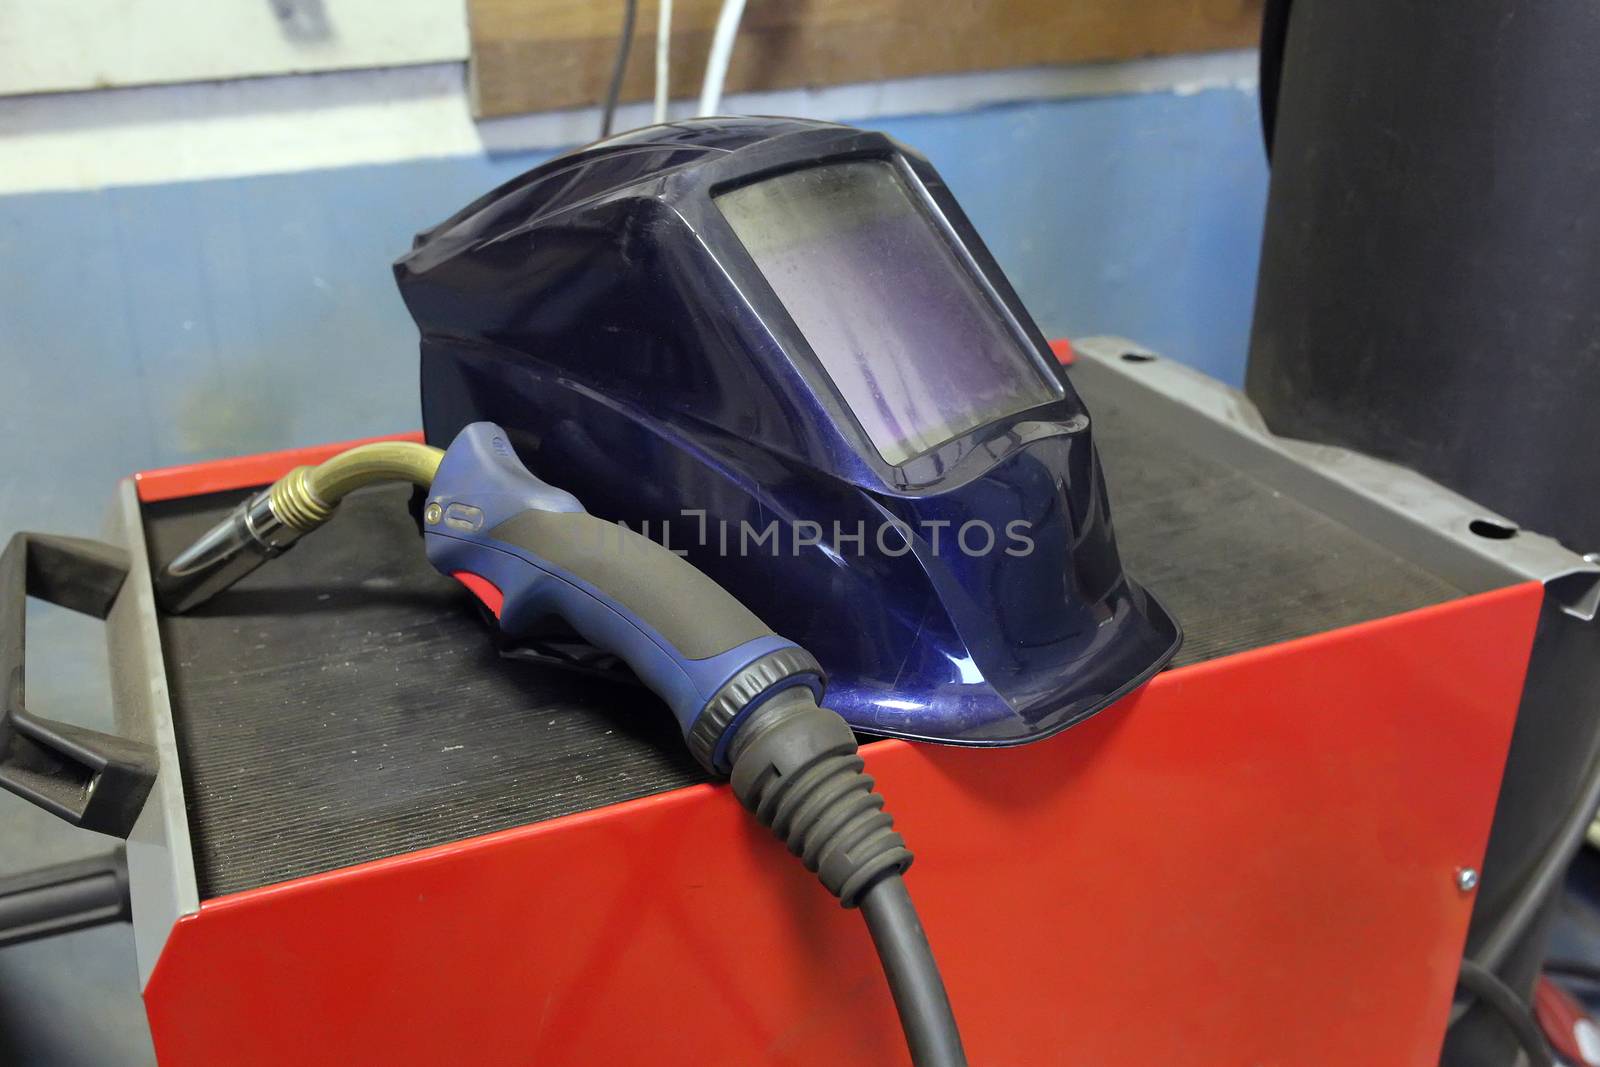 Tools for welding. Welders protective mask, electrode lies by 977_ReX_977